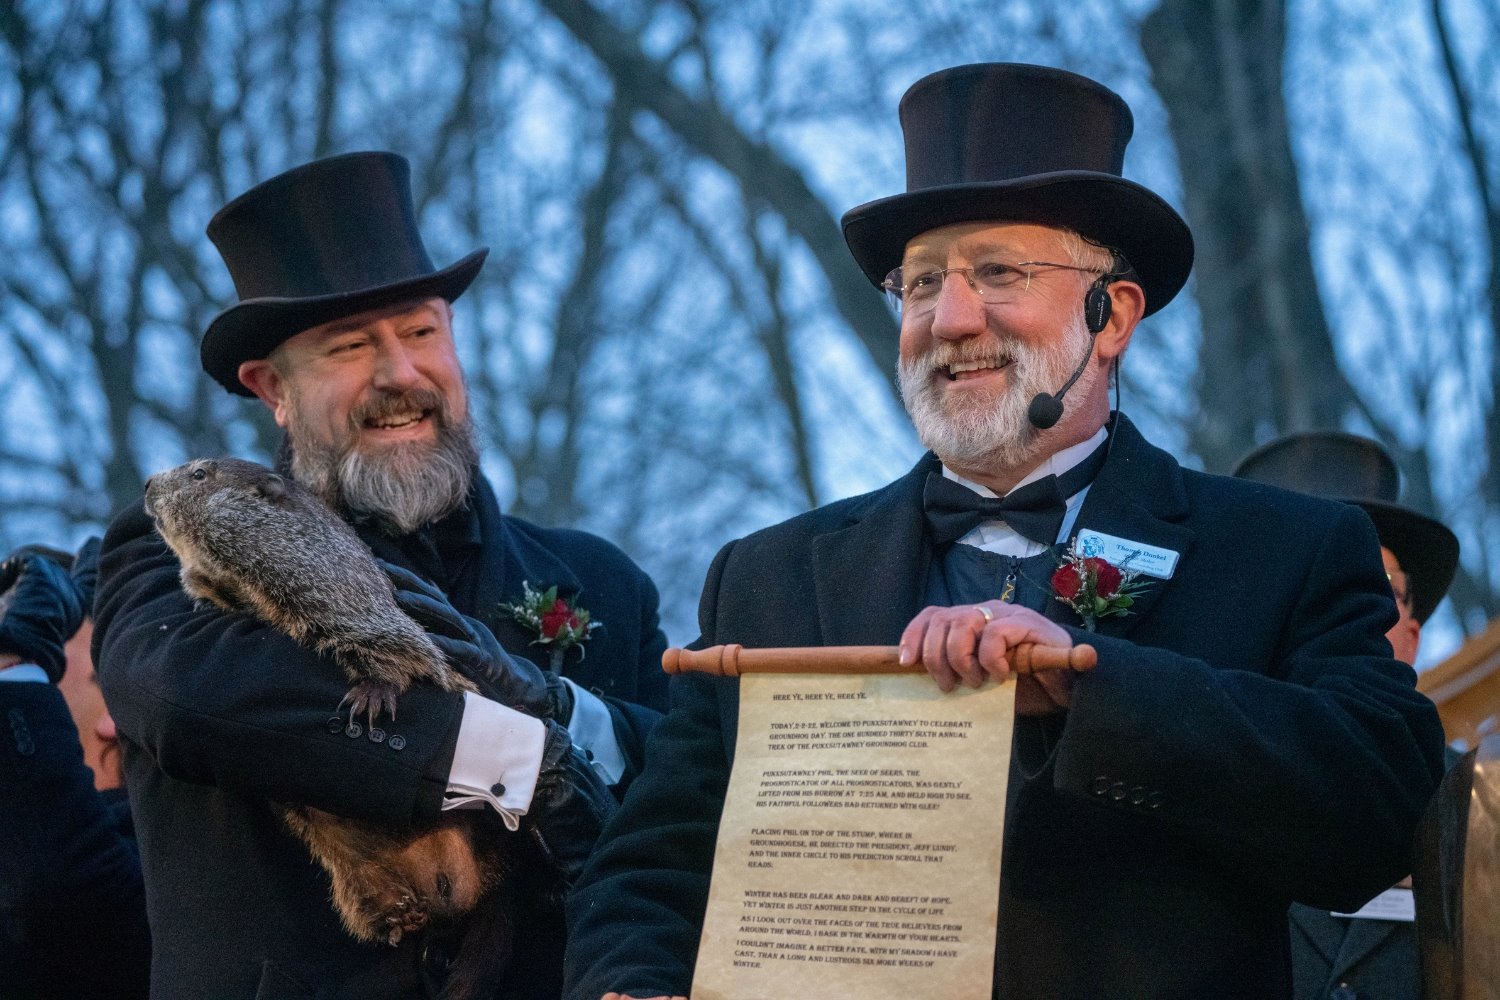 The Surprising Truth Behind Groundhog Day Revealed!